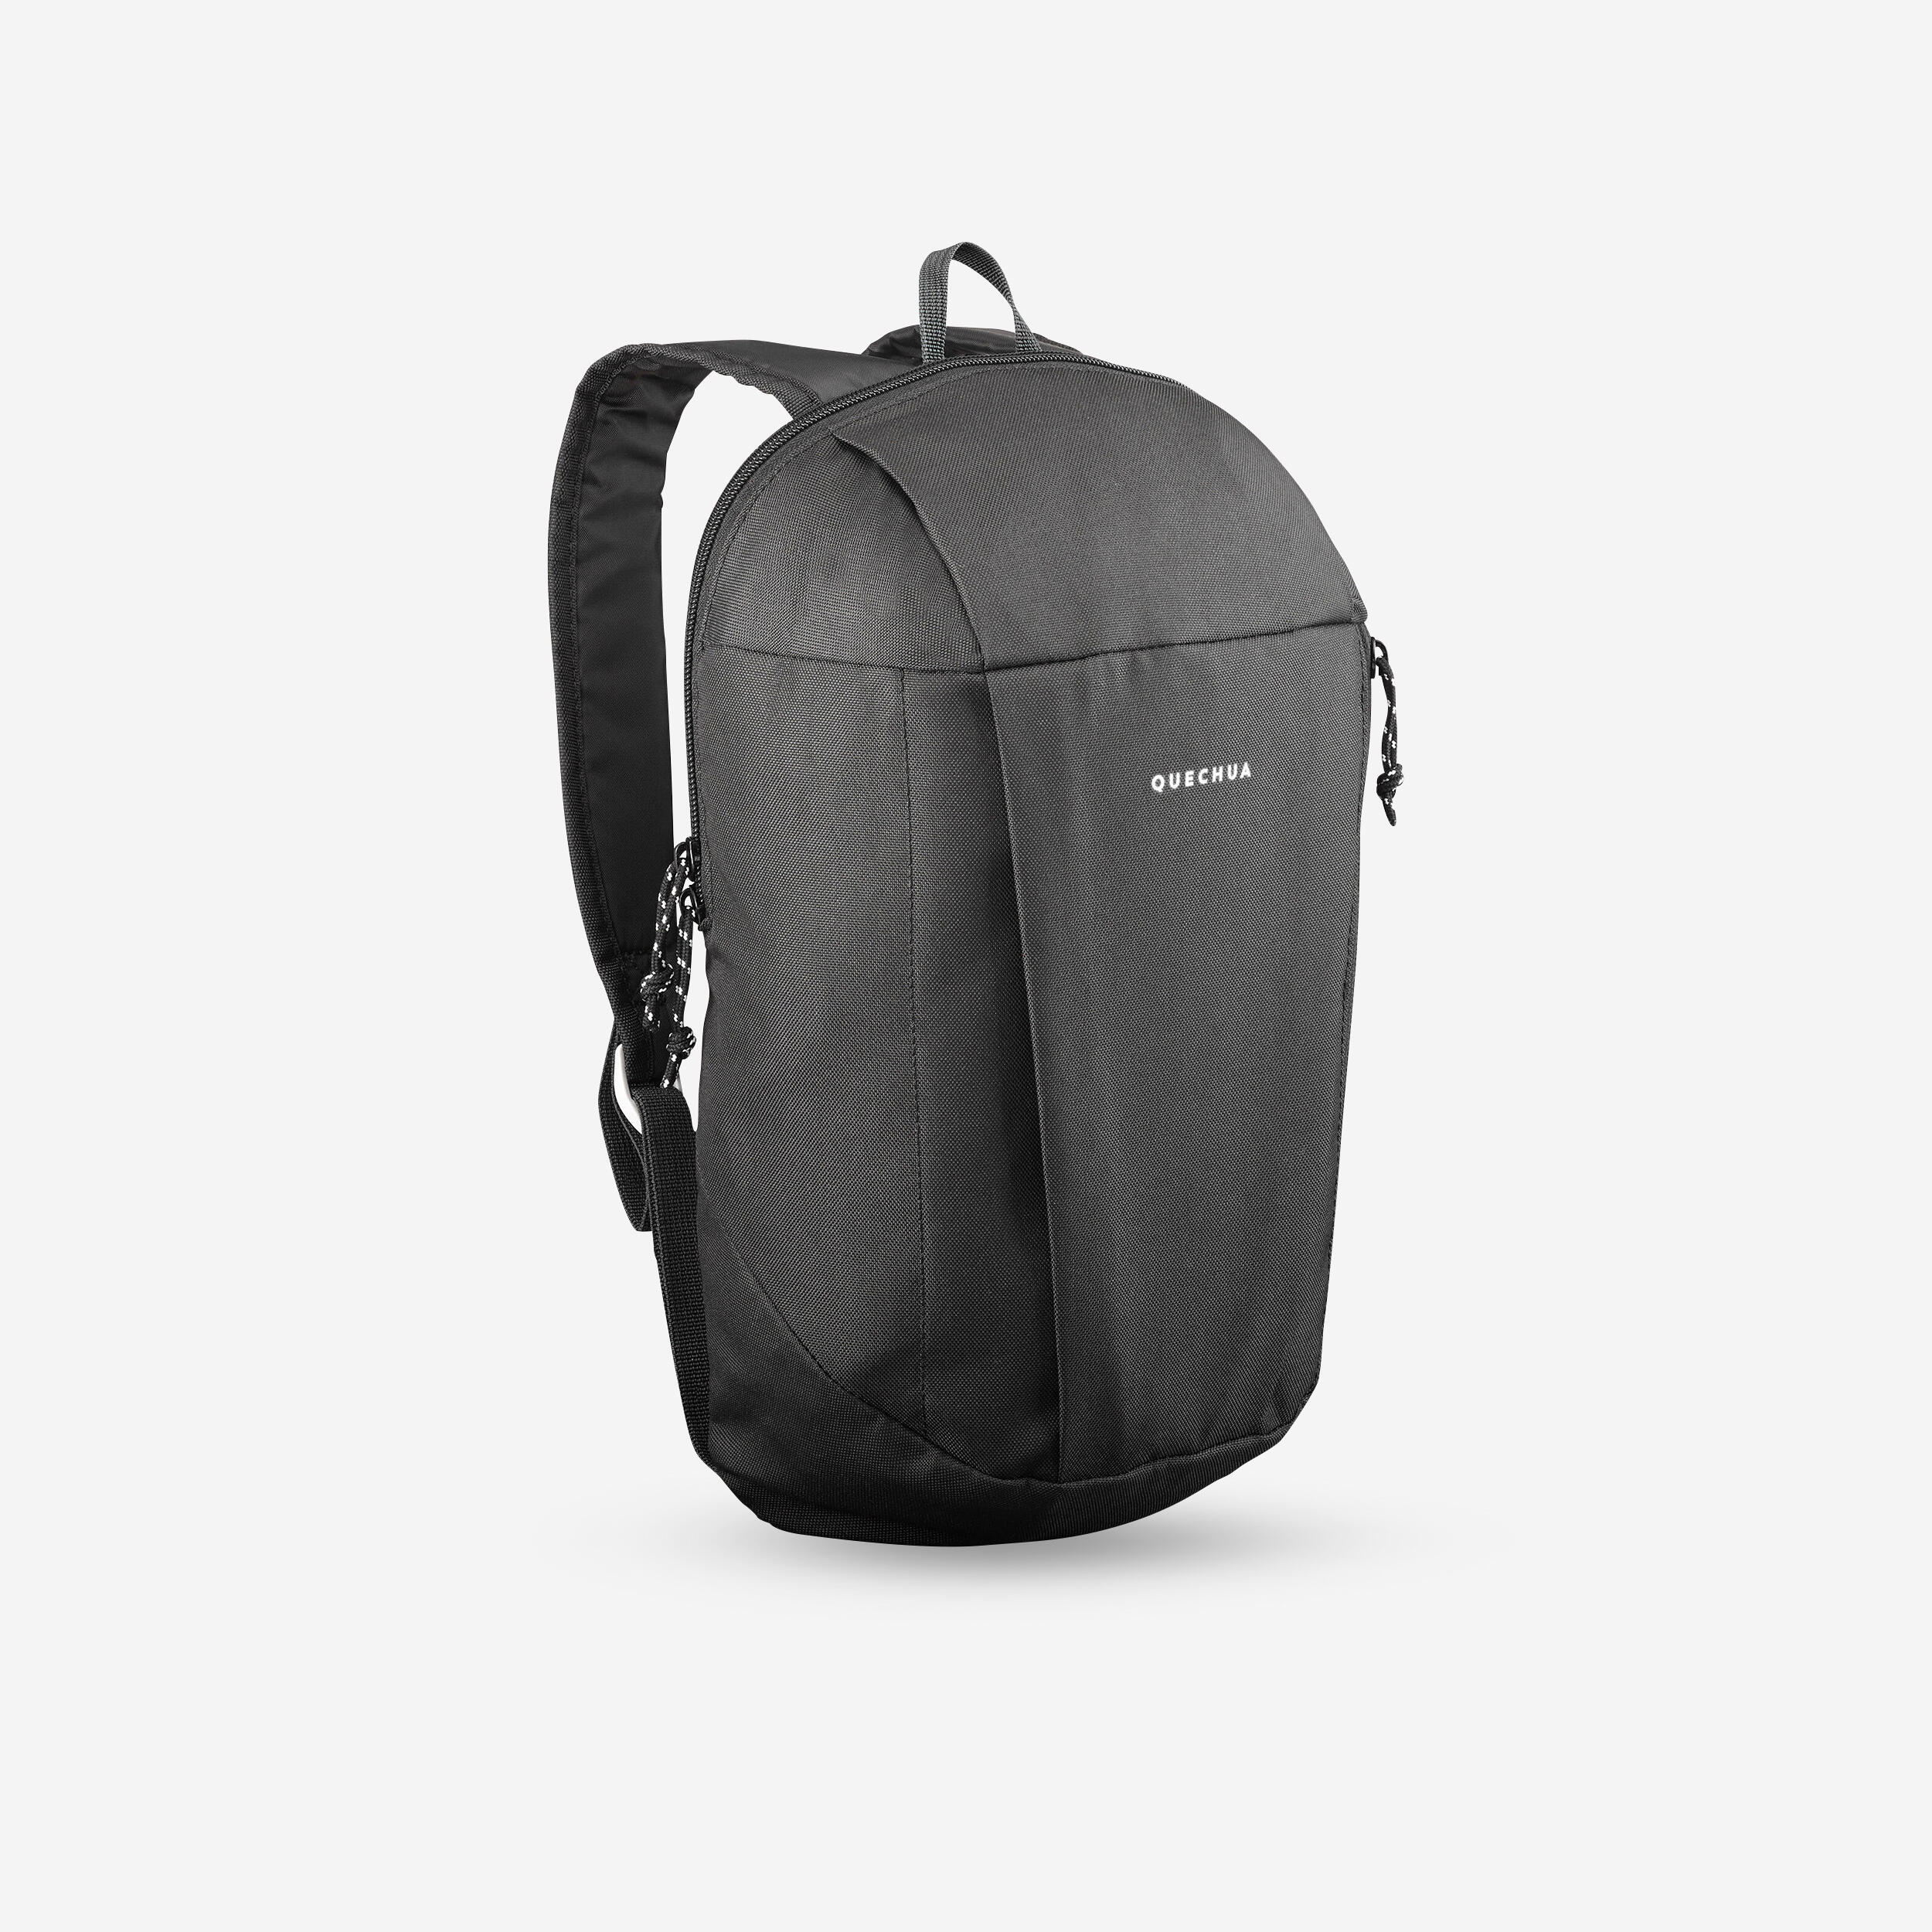 Quechua Hiking Backpack 10 L - Nh Arpenaz 50